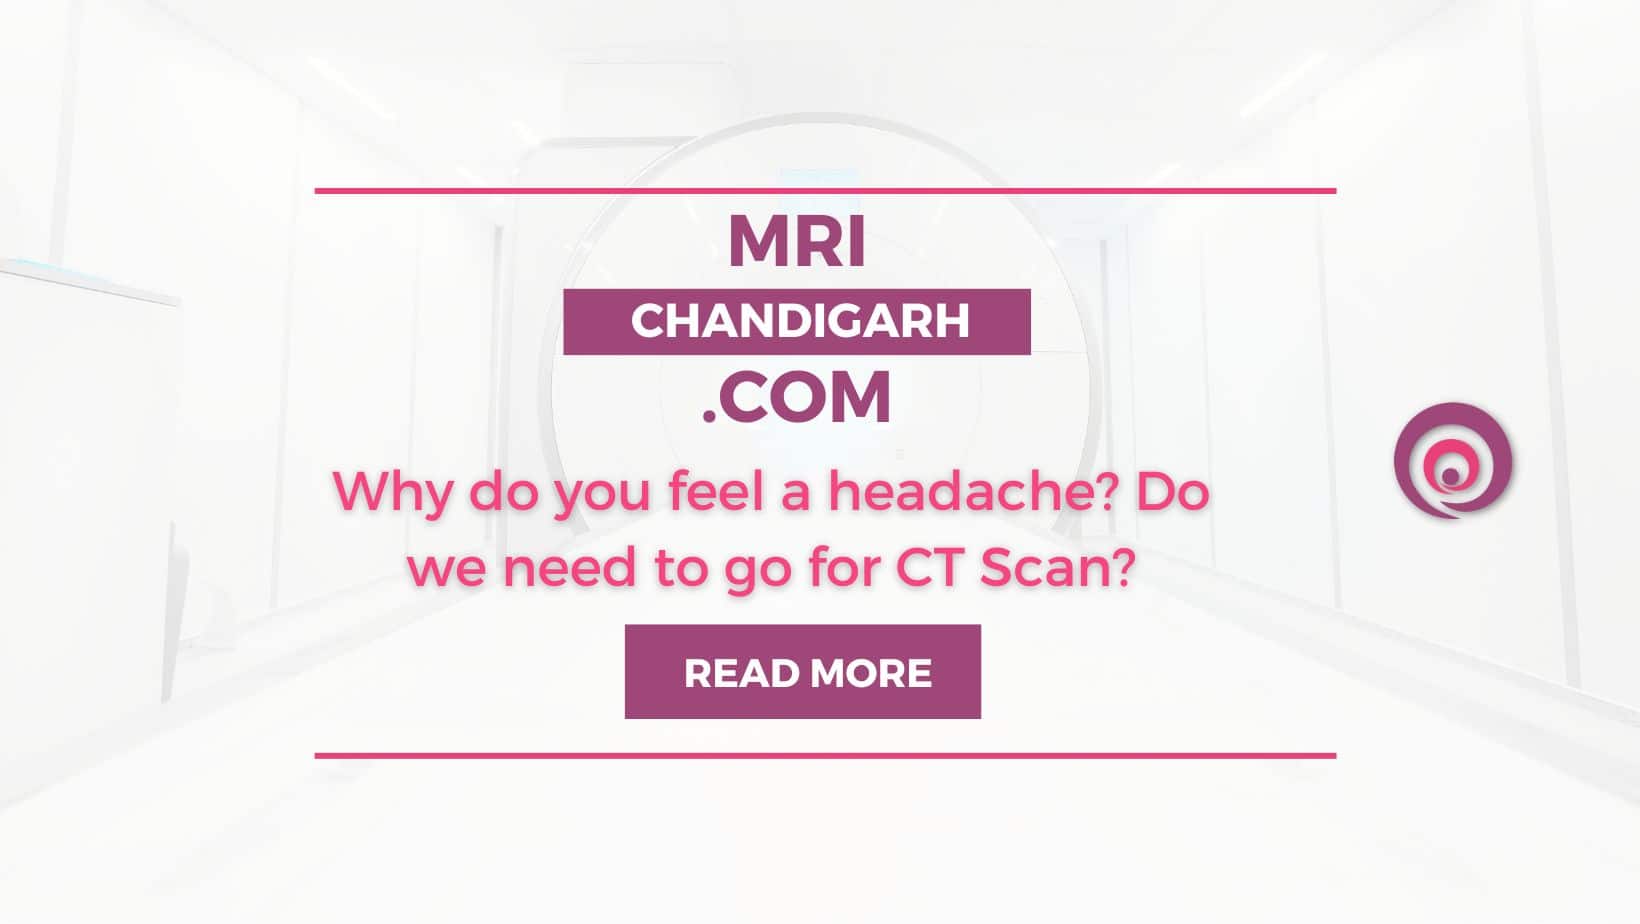 Why do you feel headache? Do we need to go for CT Scan?